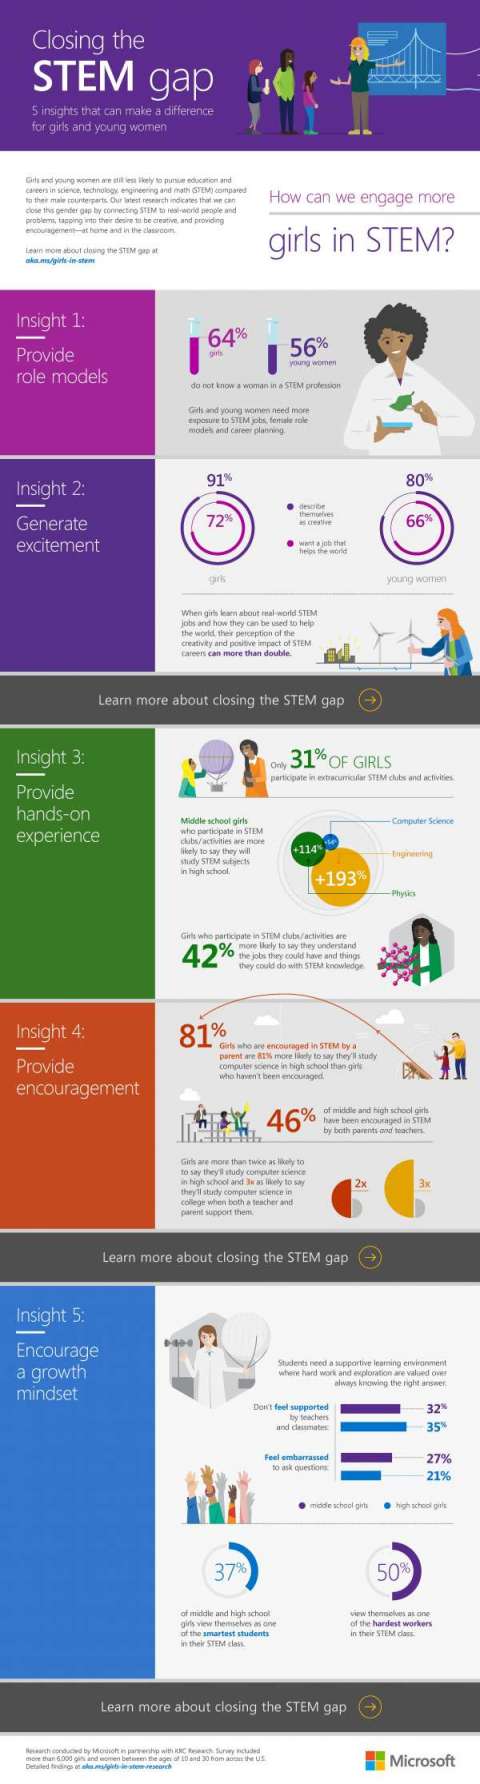 Closing the STEM Gap: 5 insights that can make a difference for girls and young women